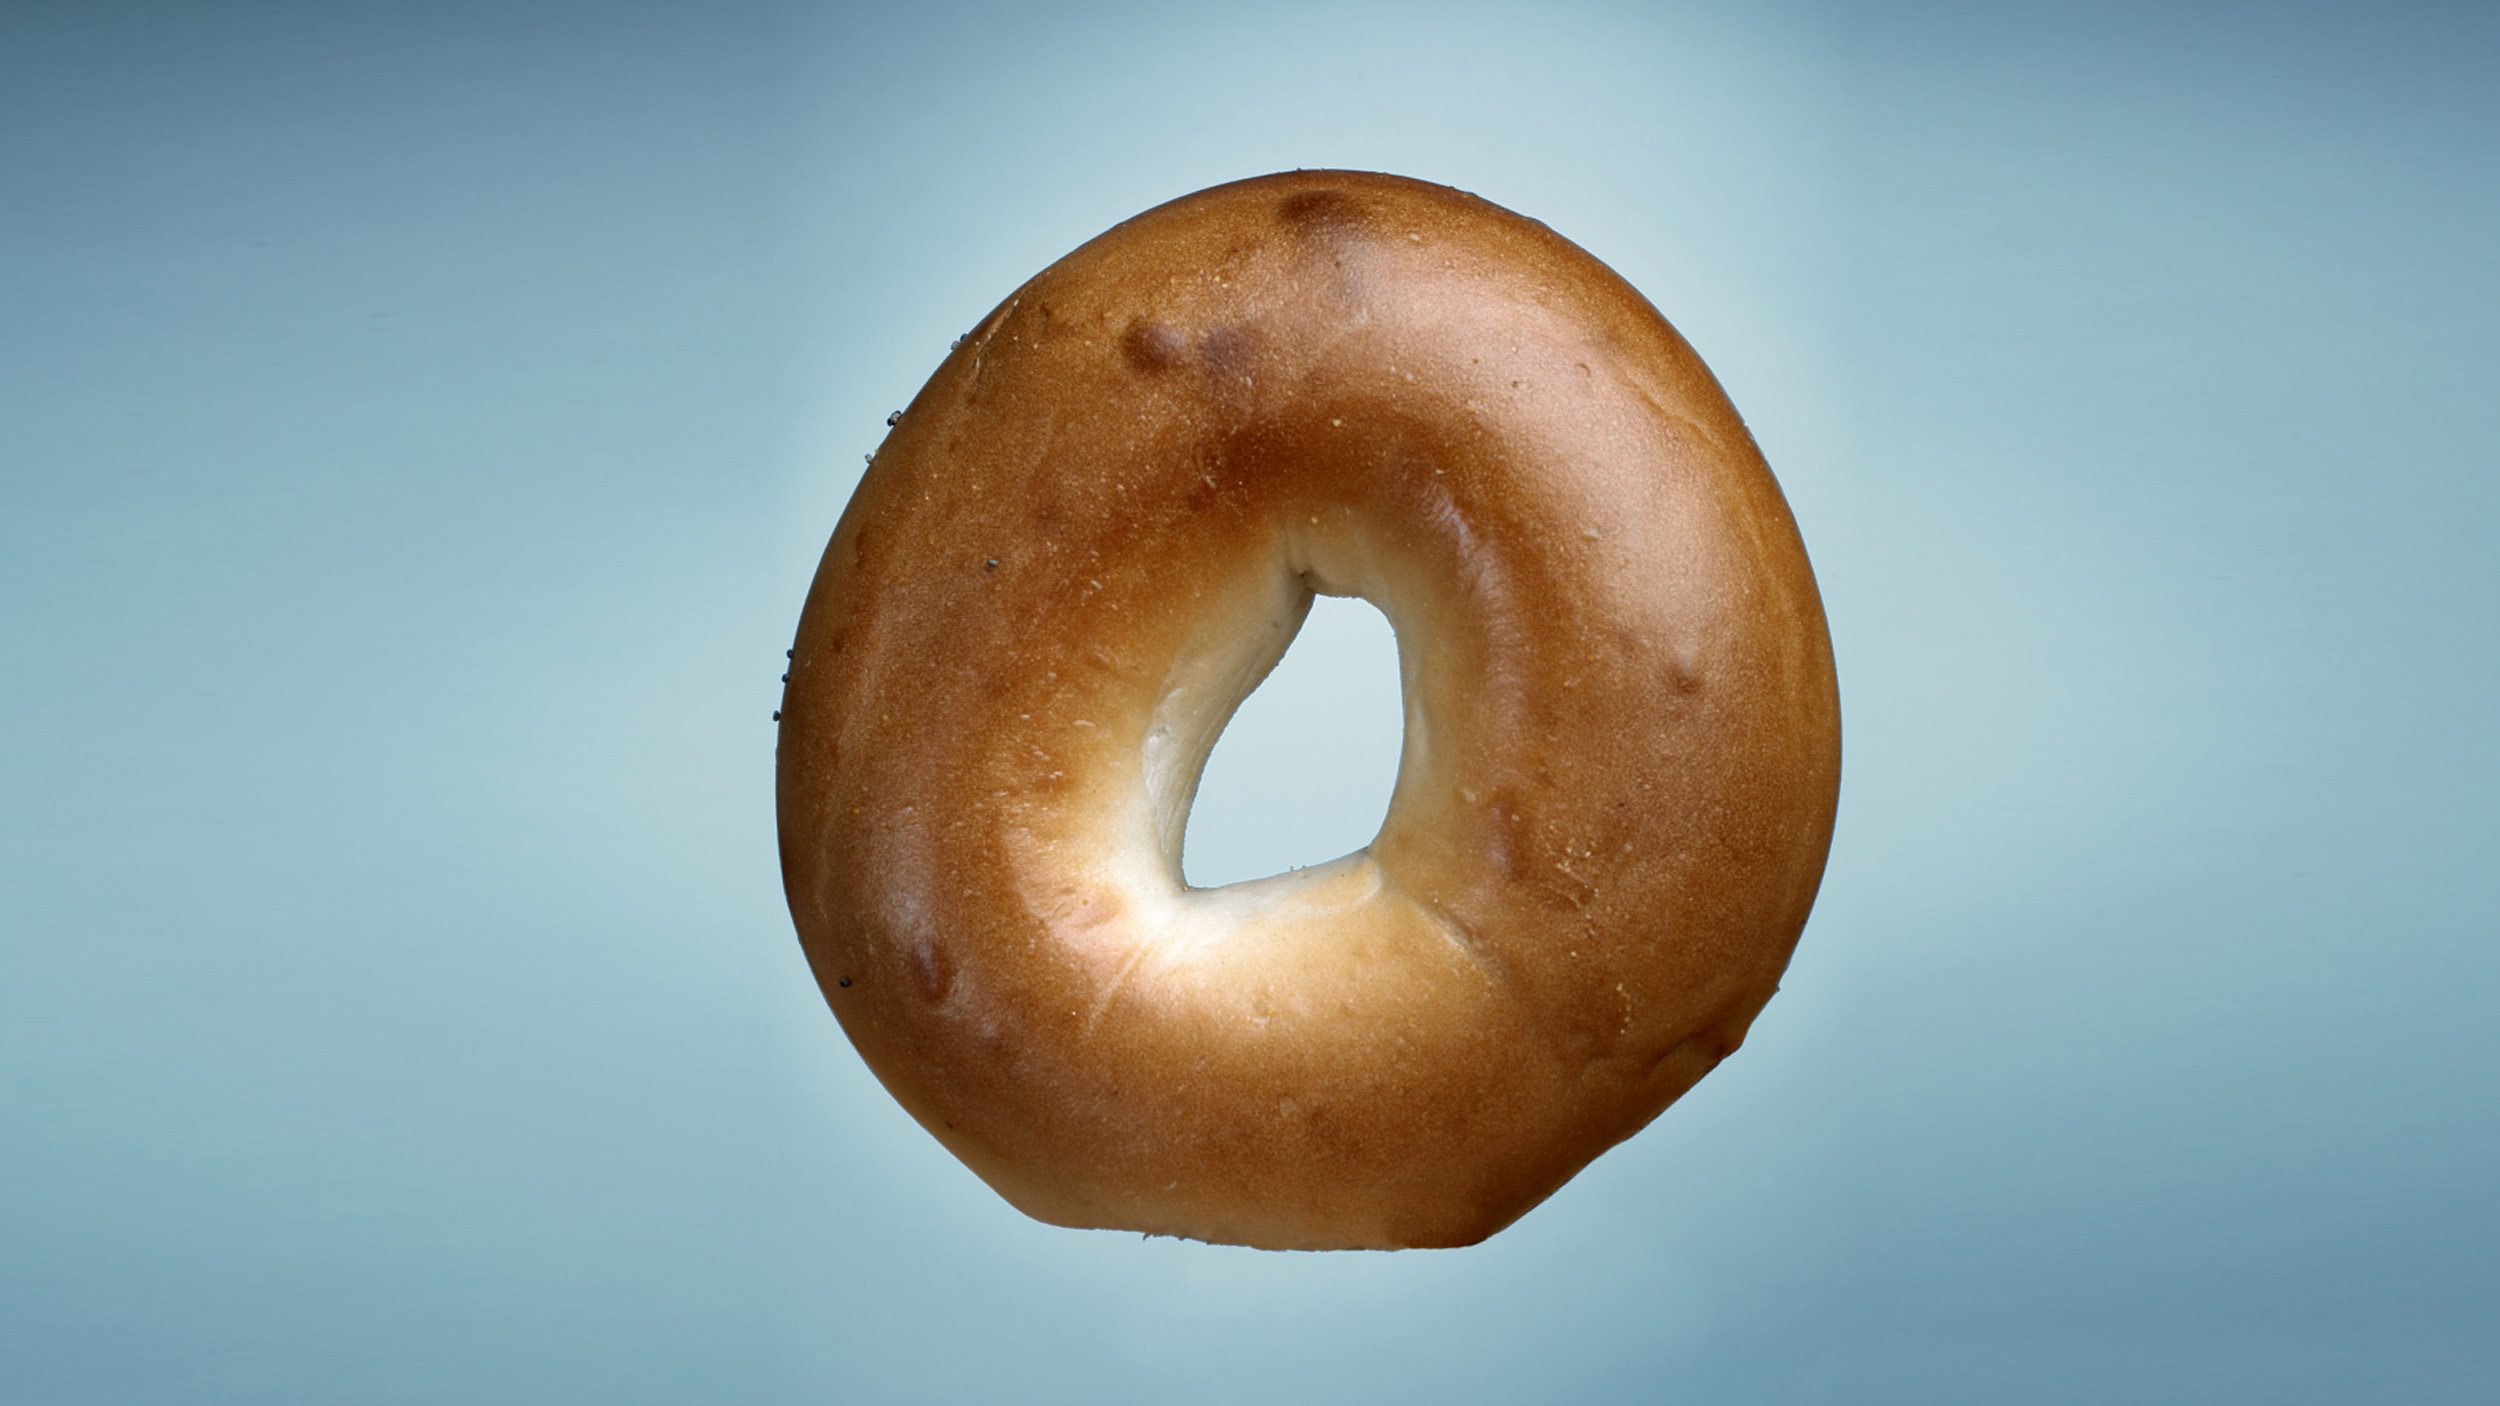 A bagel with benefits - Arrell Food Institute